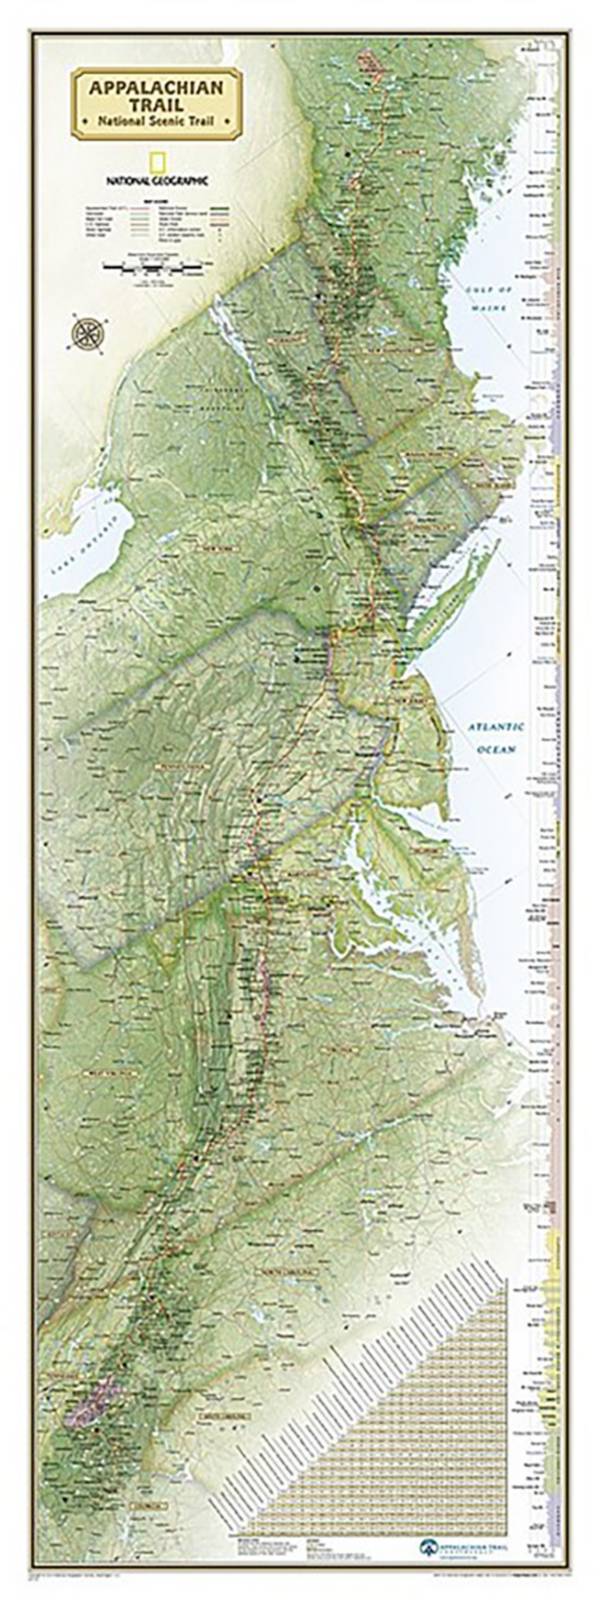 National Geographic Appalachian Trail Wall Map product image